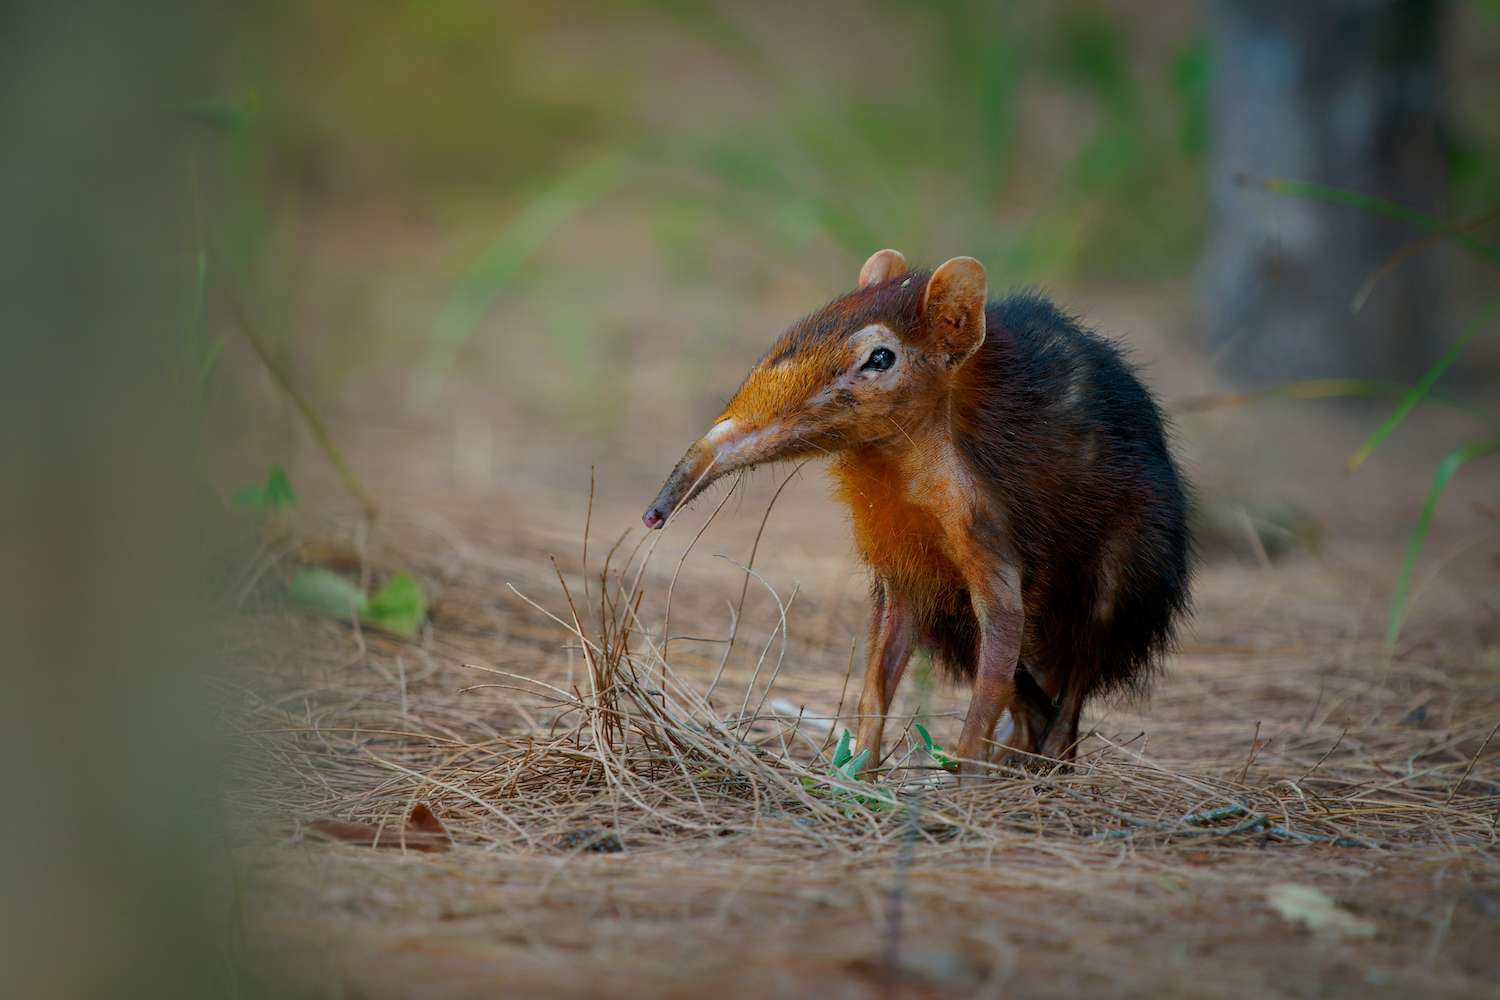 Black and rufous elephant shrew -Rhynchocyon petersi or sengi or Zanj elephant shrew, found only in Africa, native to the lowland montane and dense forests of Kenya and Tanzania.